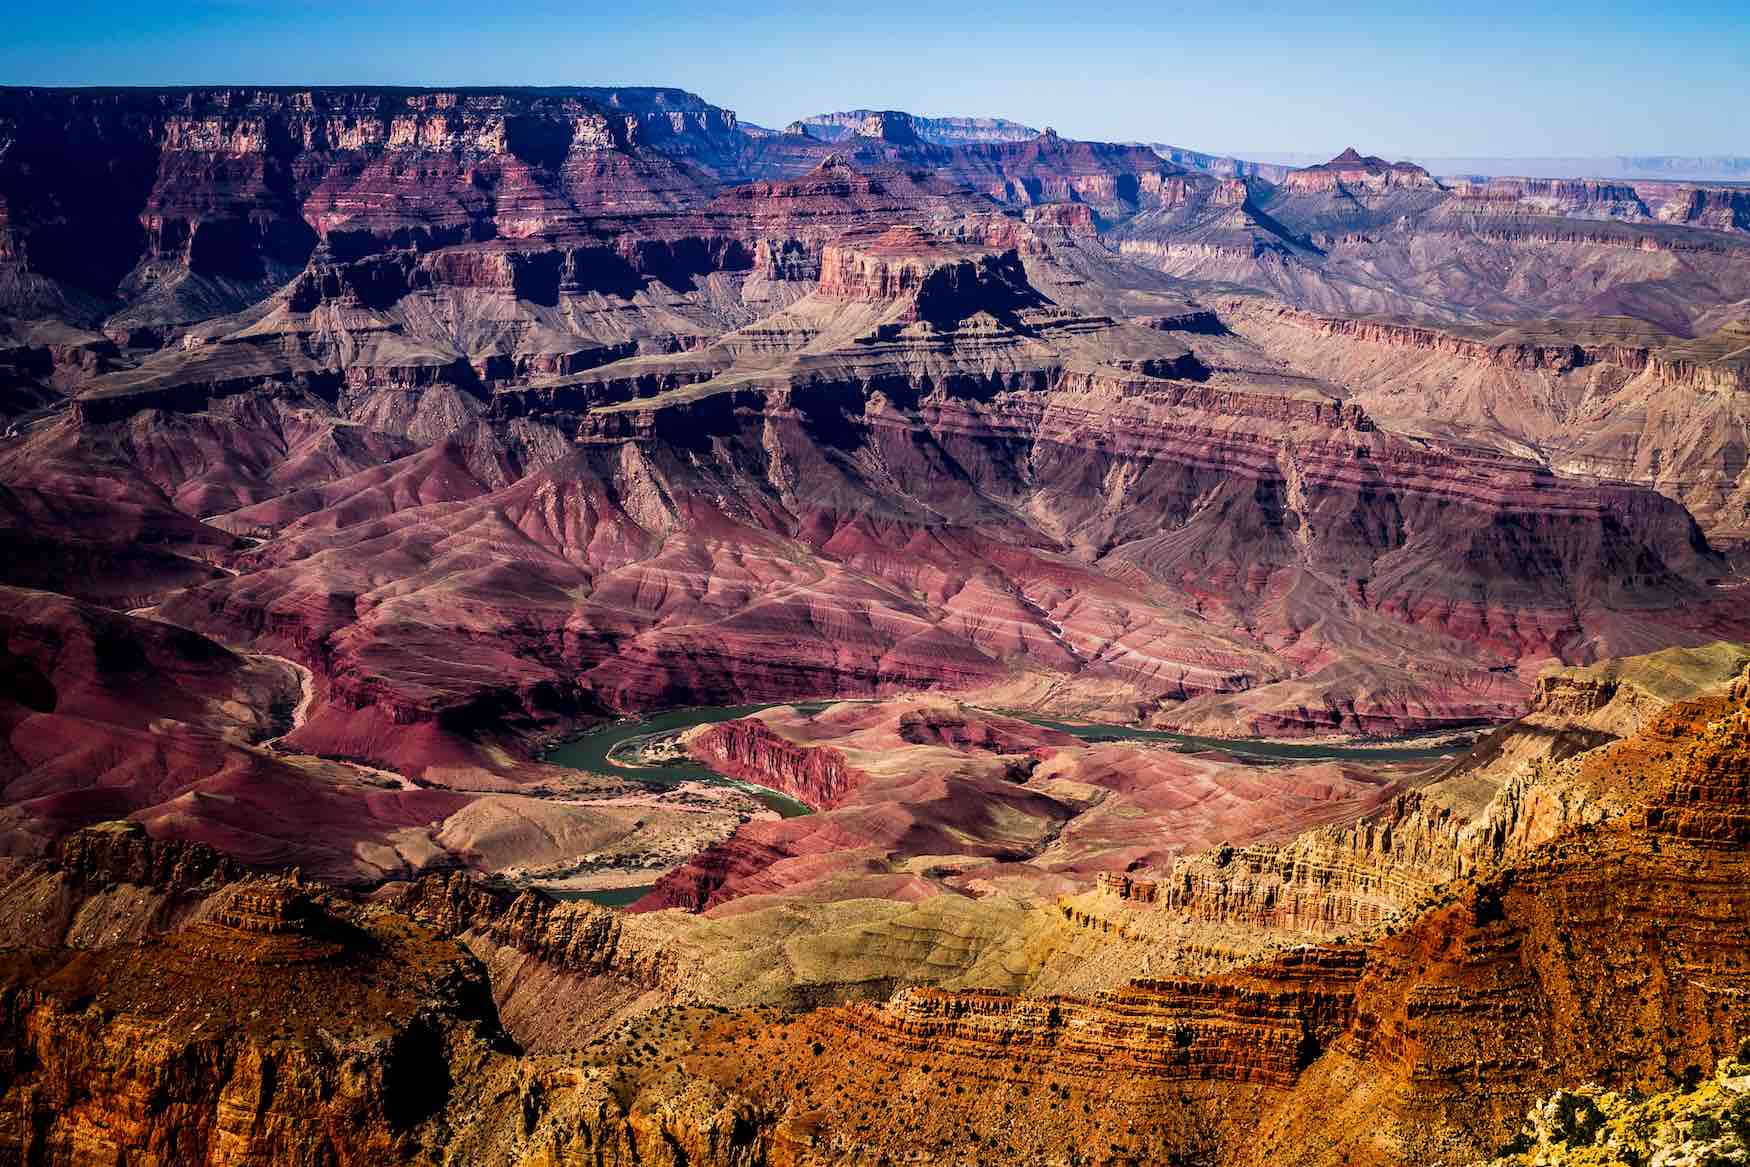 Only Have One Day in Grand Canyon? Here's the Perfect List of Must-Sees!